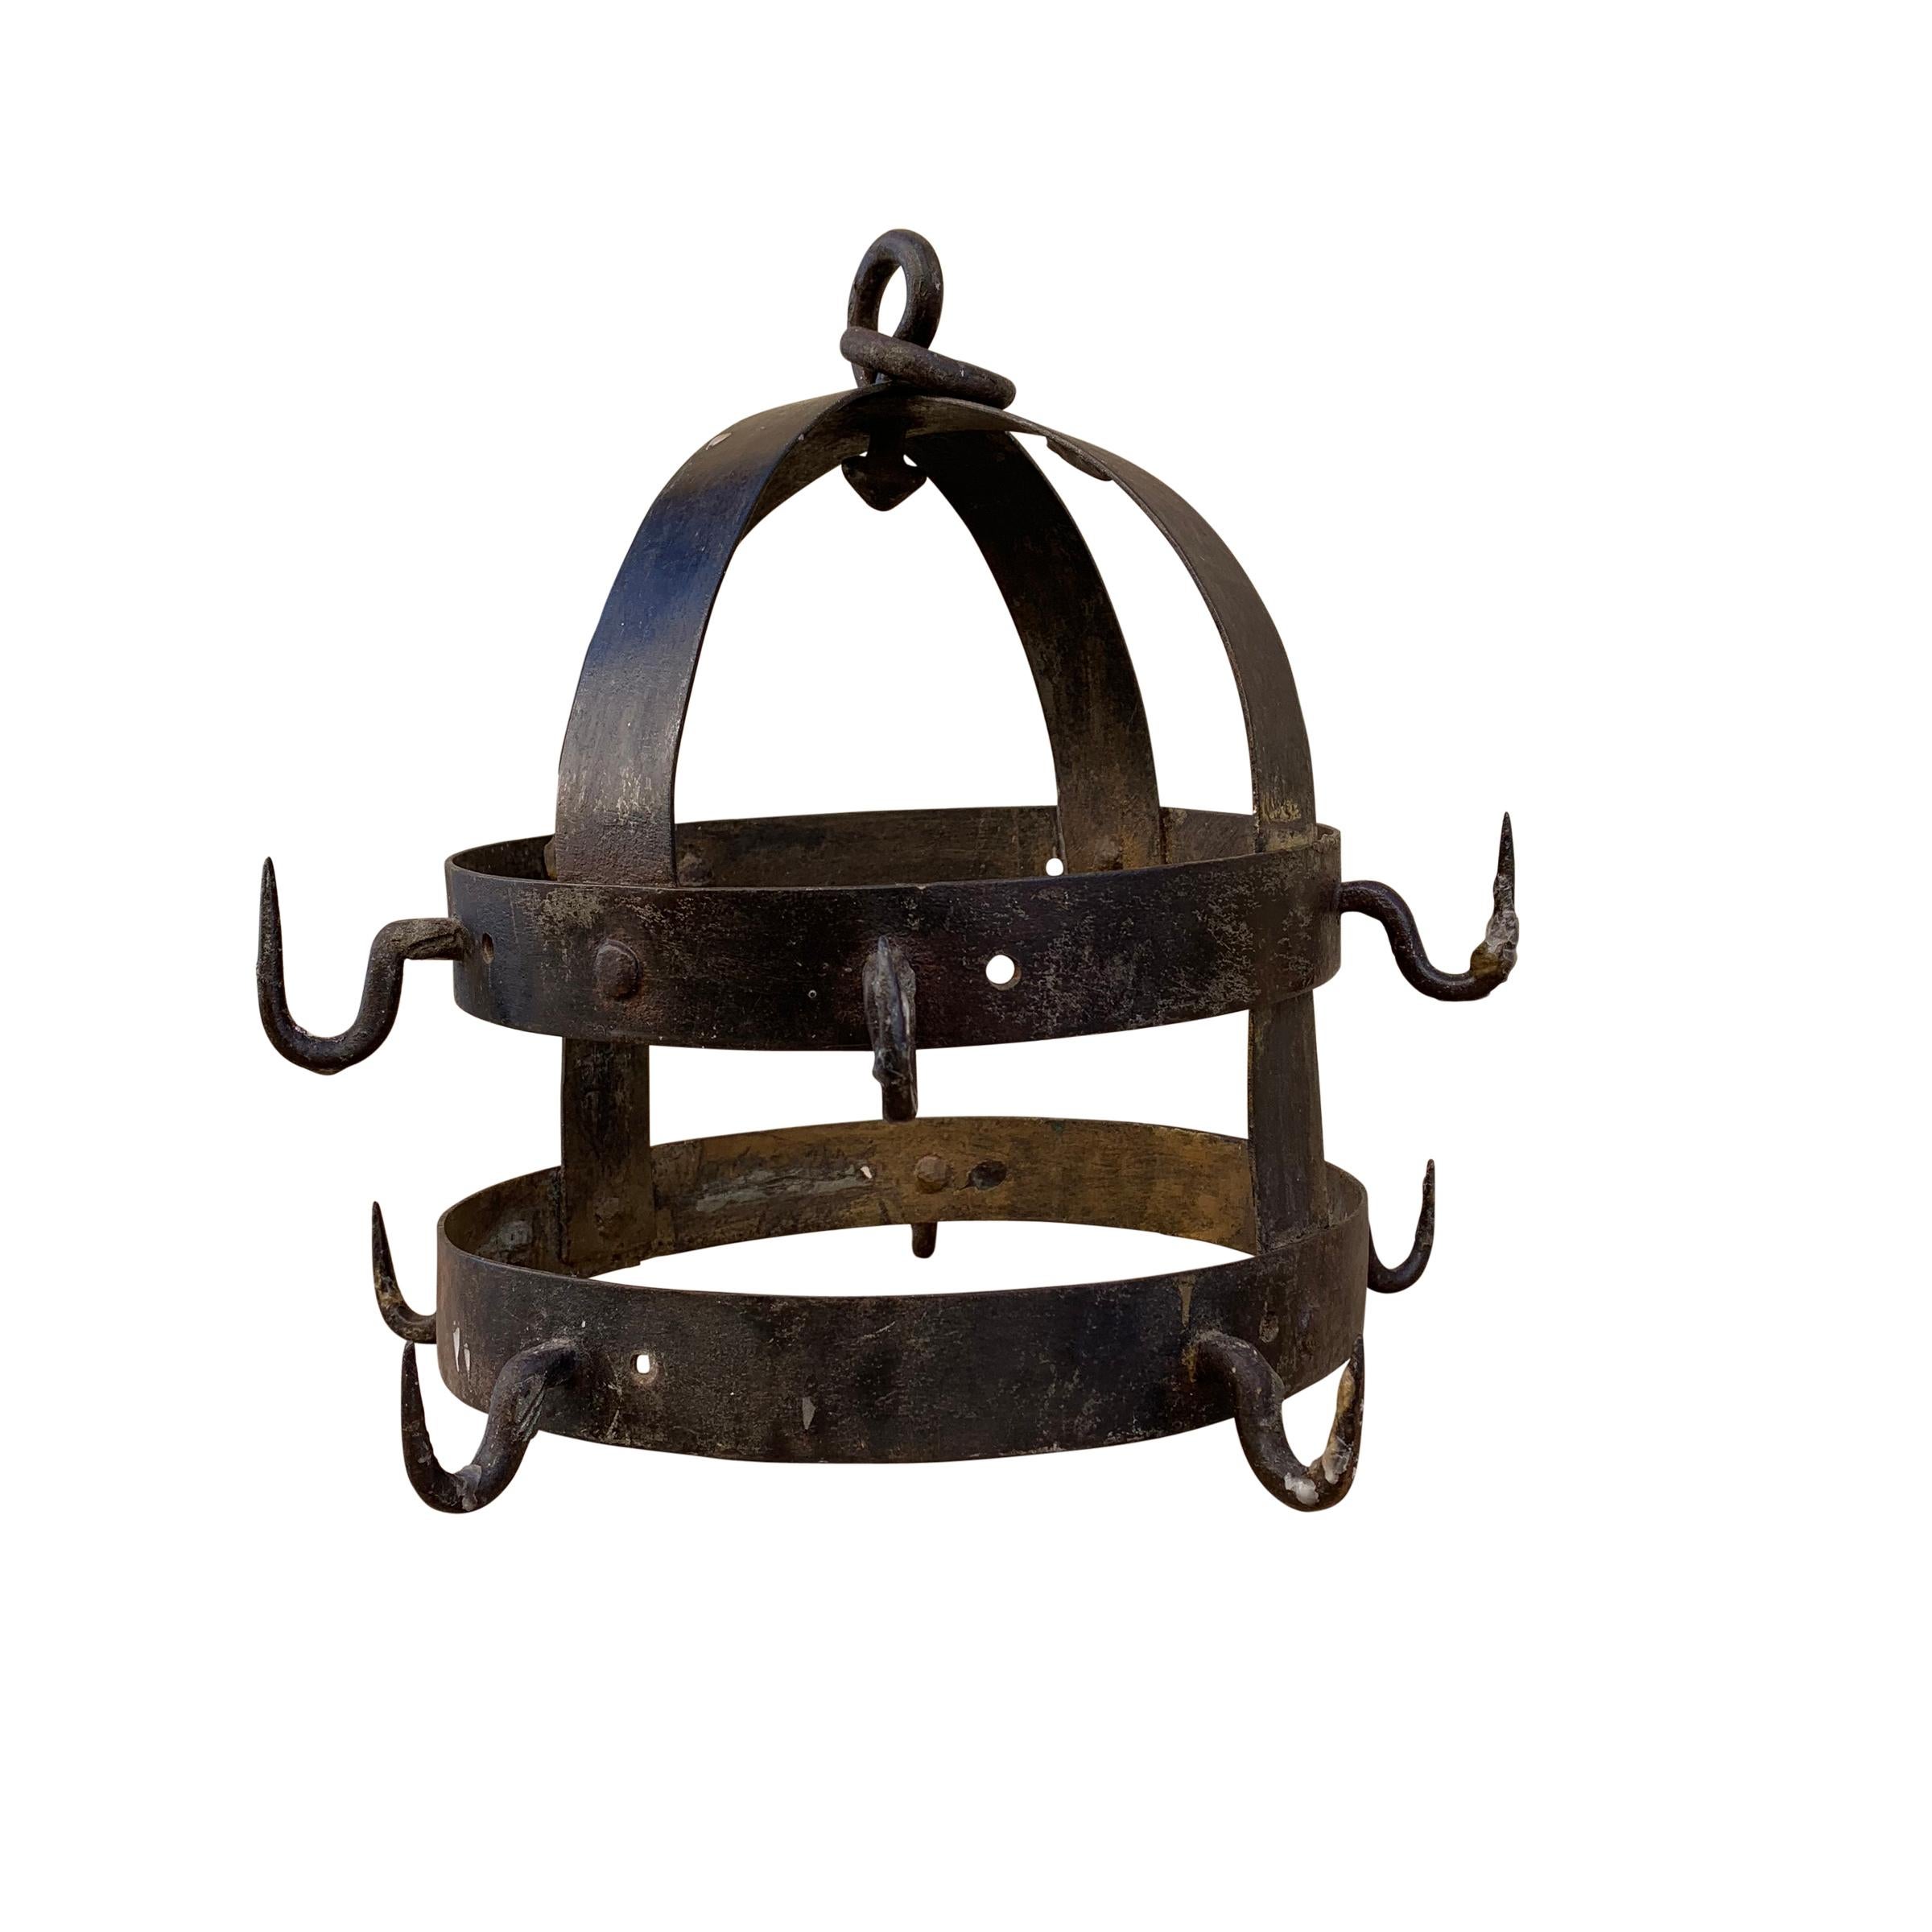 A beautiful 18th century French handwrought iron game rack with two outer rings with ten hooks. Game racks were used to age pheasants, rabbits, or any other small game, after the hunt. This would make the most perfect pot rack in small kitchen, or